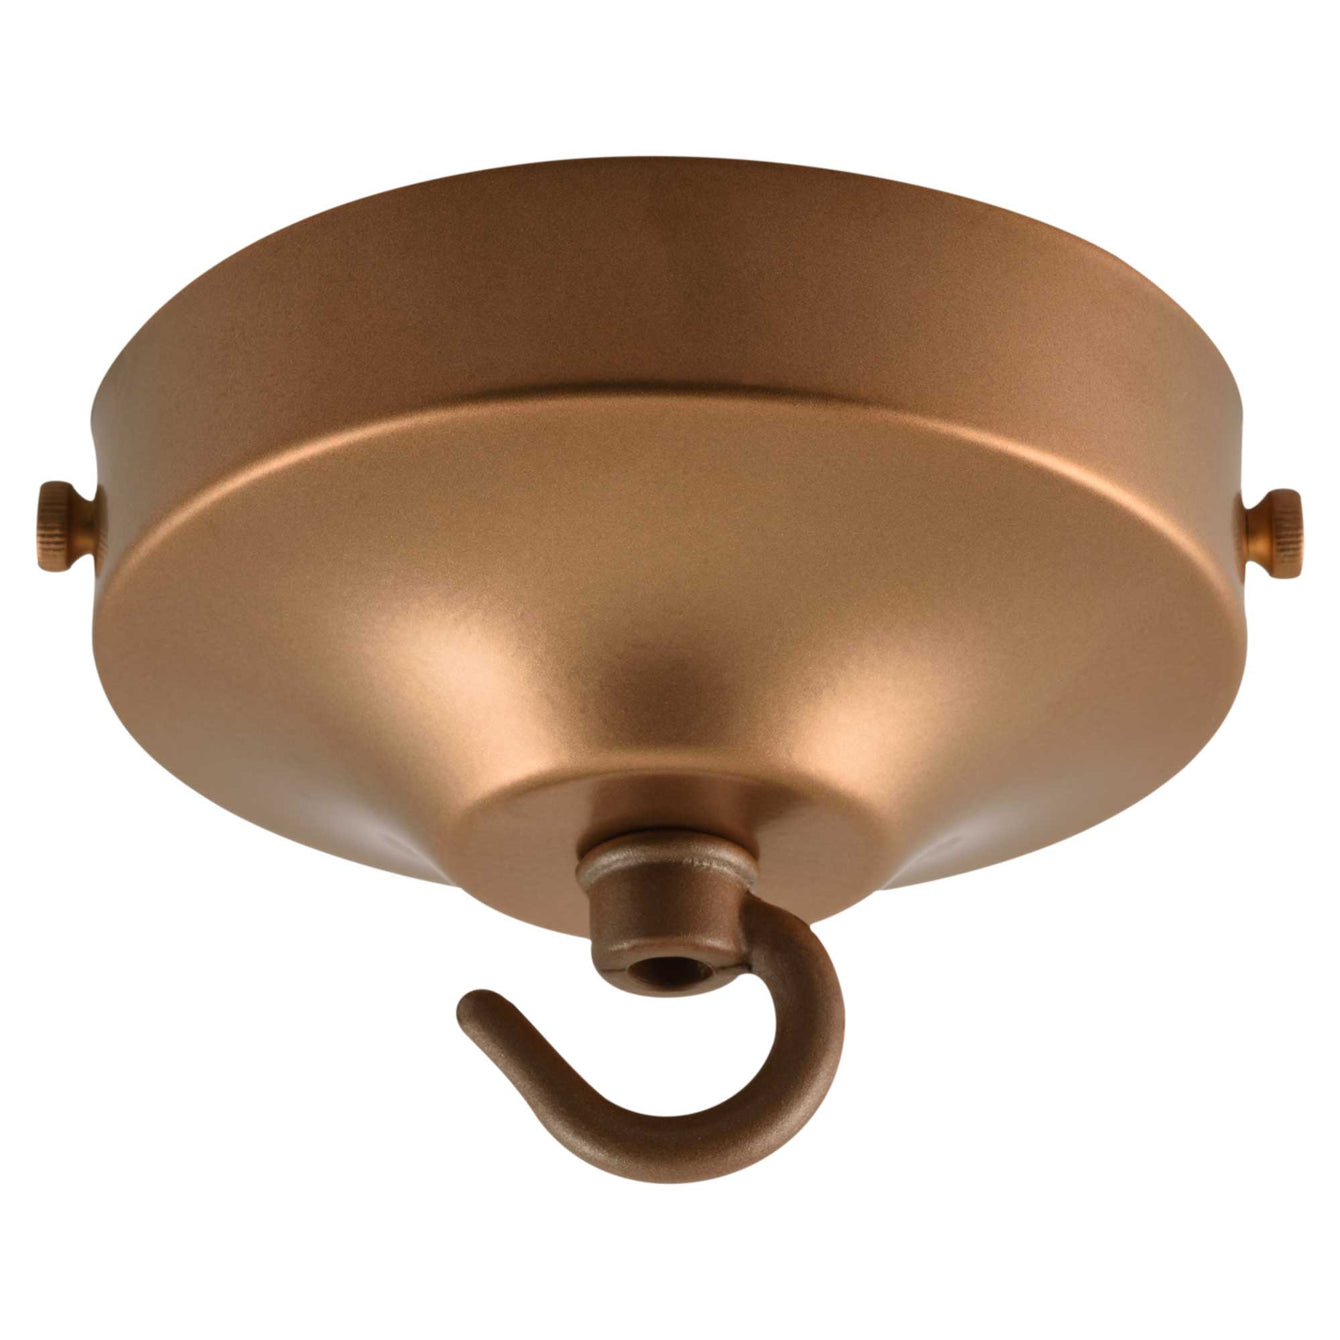 ElekTek 100mm Diameter Convex Ceiling Rose with Strap Bracket and Hook Metallic and Powder Coated Finishes Antique White